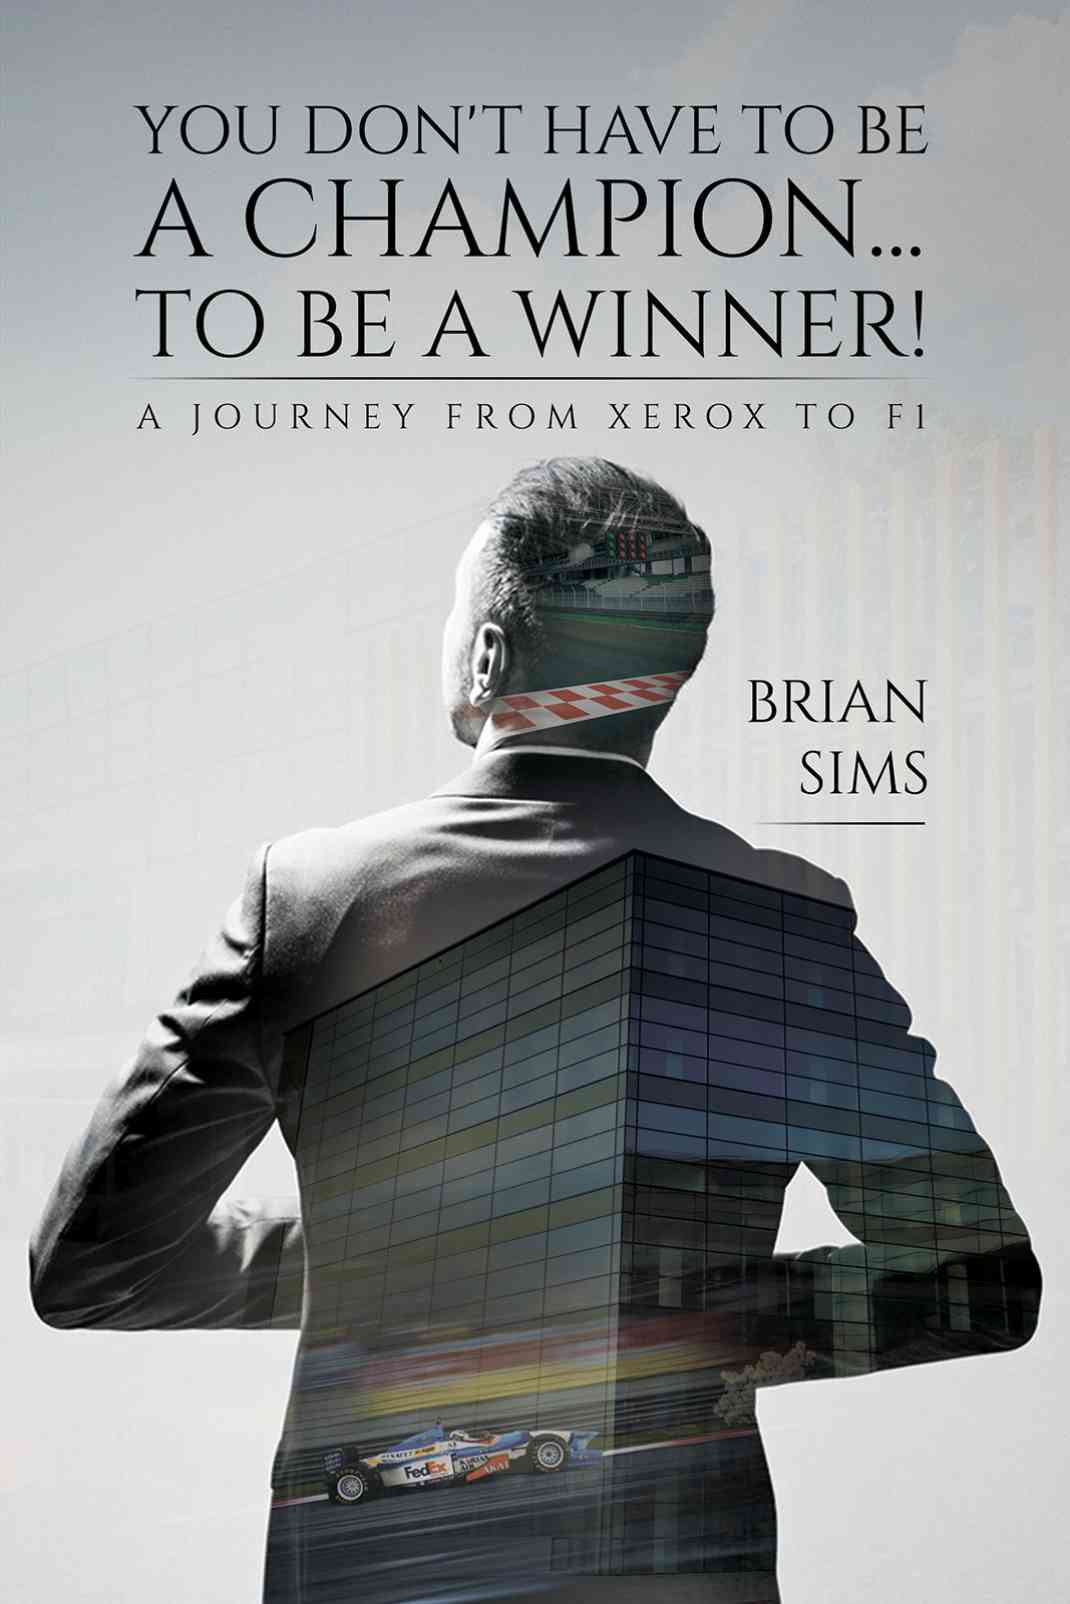 Inspiring Author Brian Sims Got Featured by the Website Upjourney.com